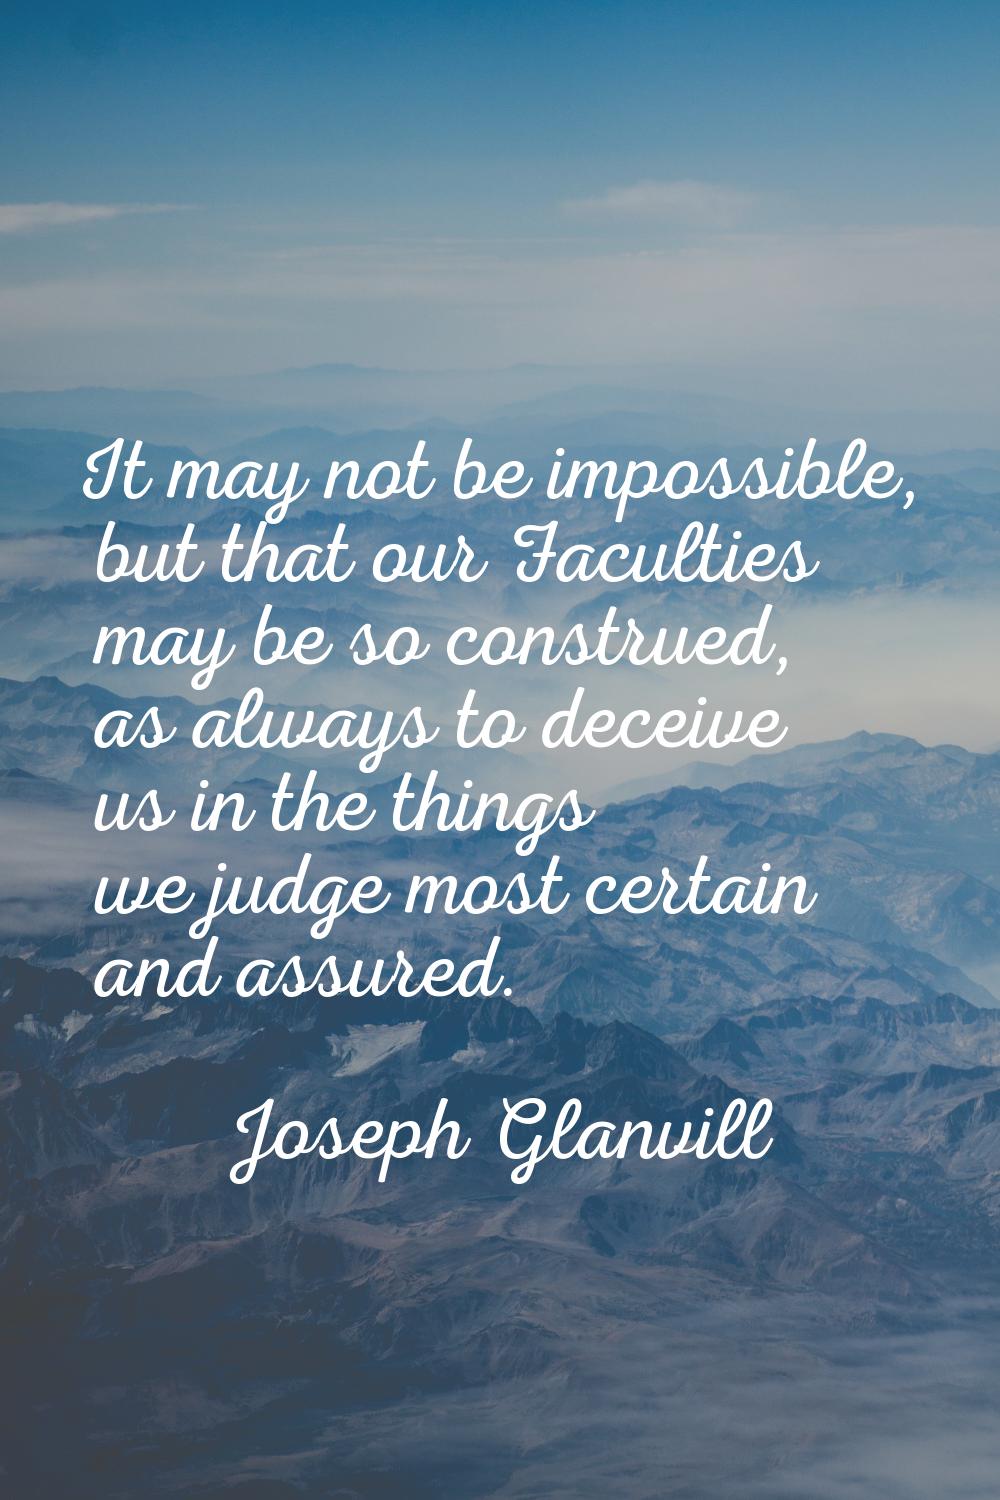 It may not be impossible, but that our Faculties may be so construed, as always to deceive us in th